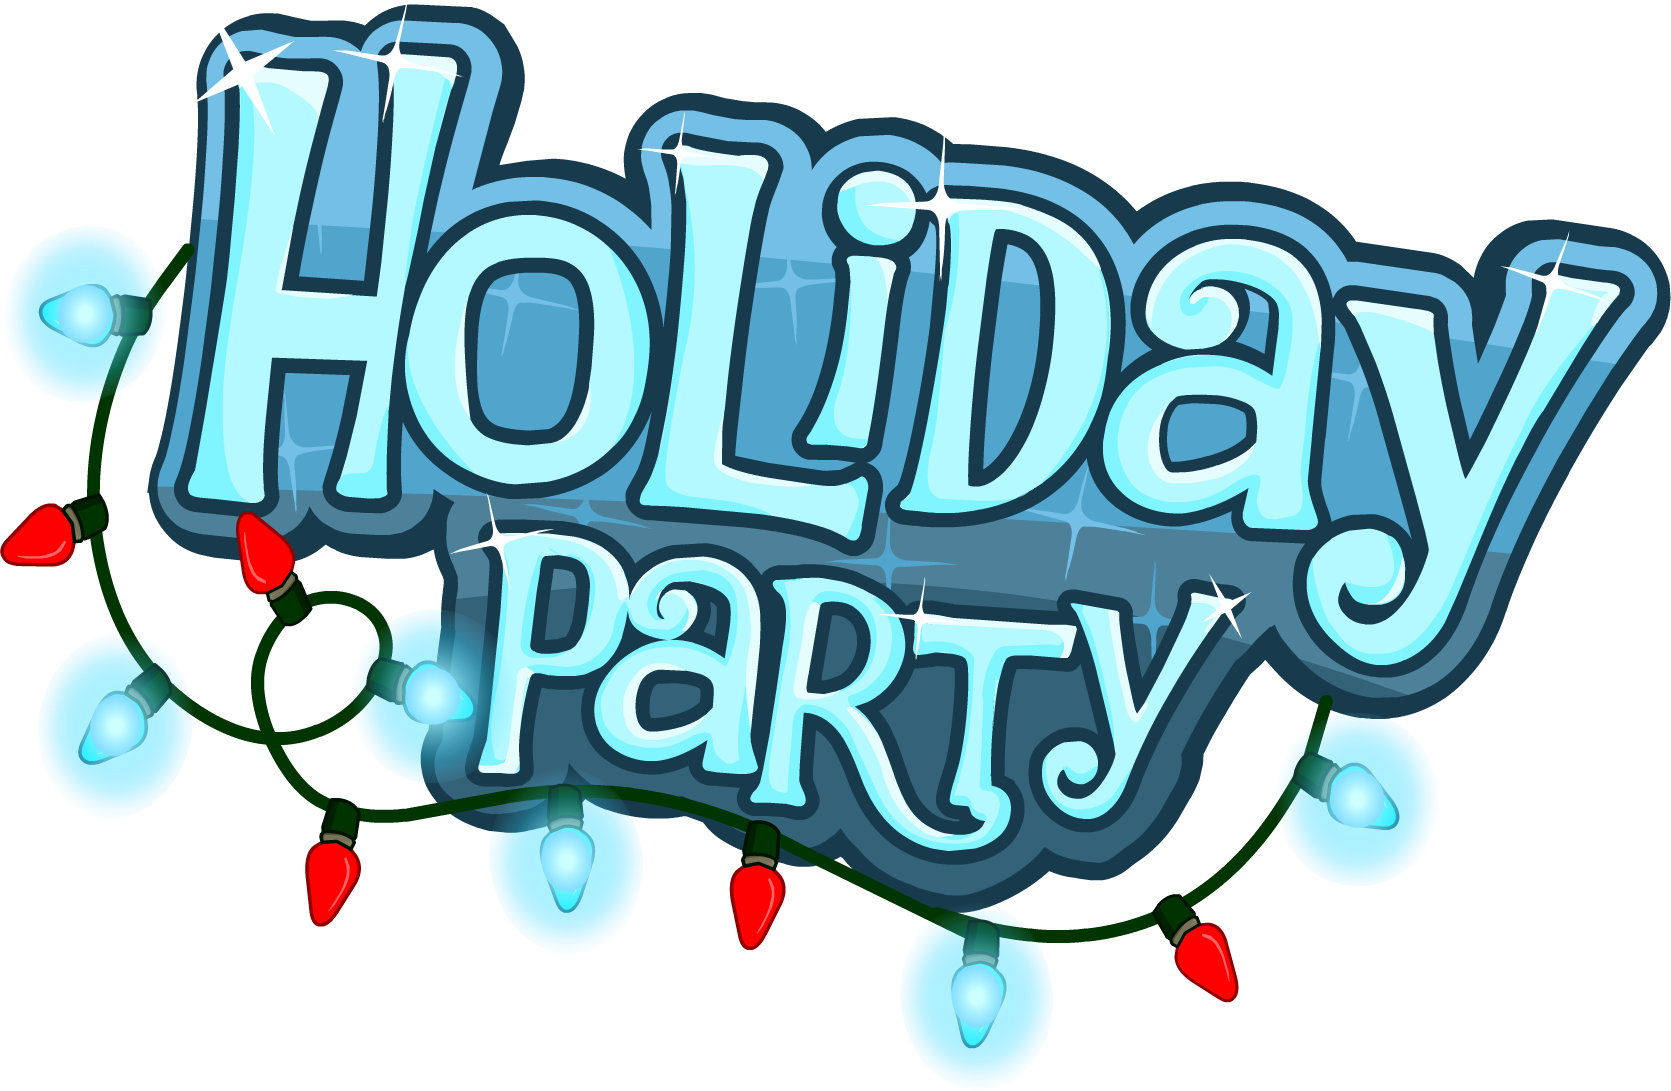 Invitation clipart christmas. Holiday party out sober